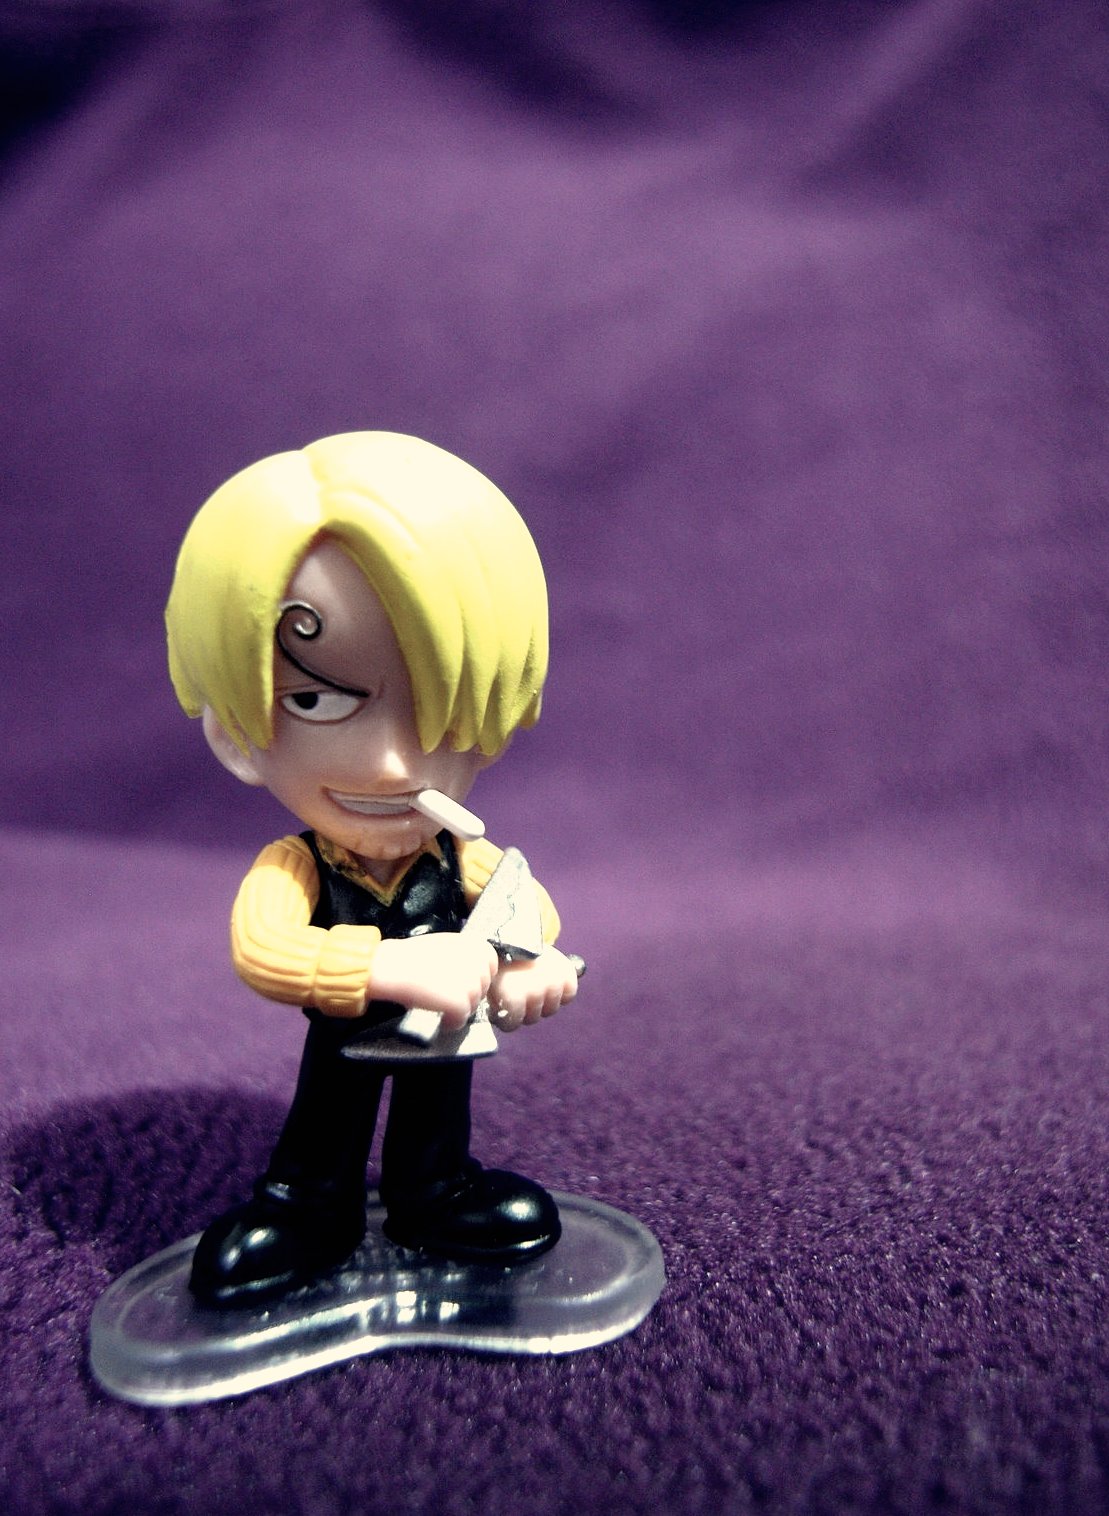 a toy figurine sitting on a purple surface